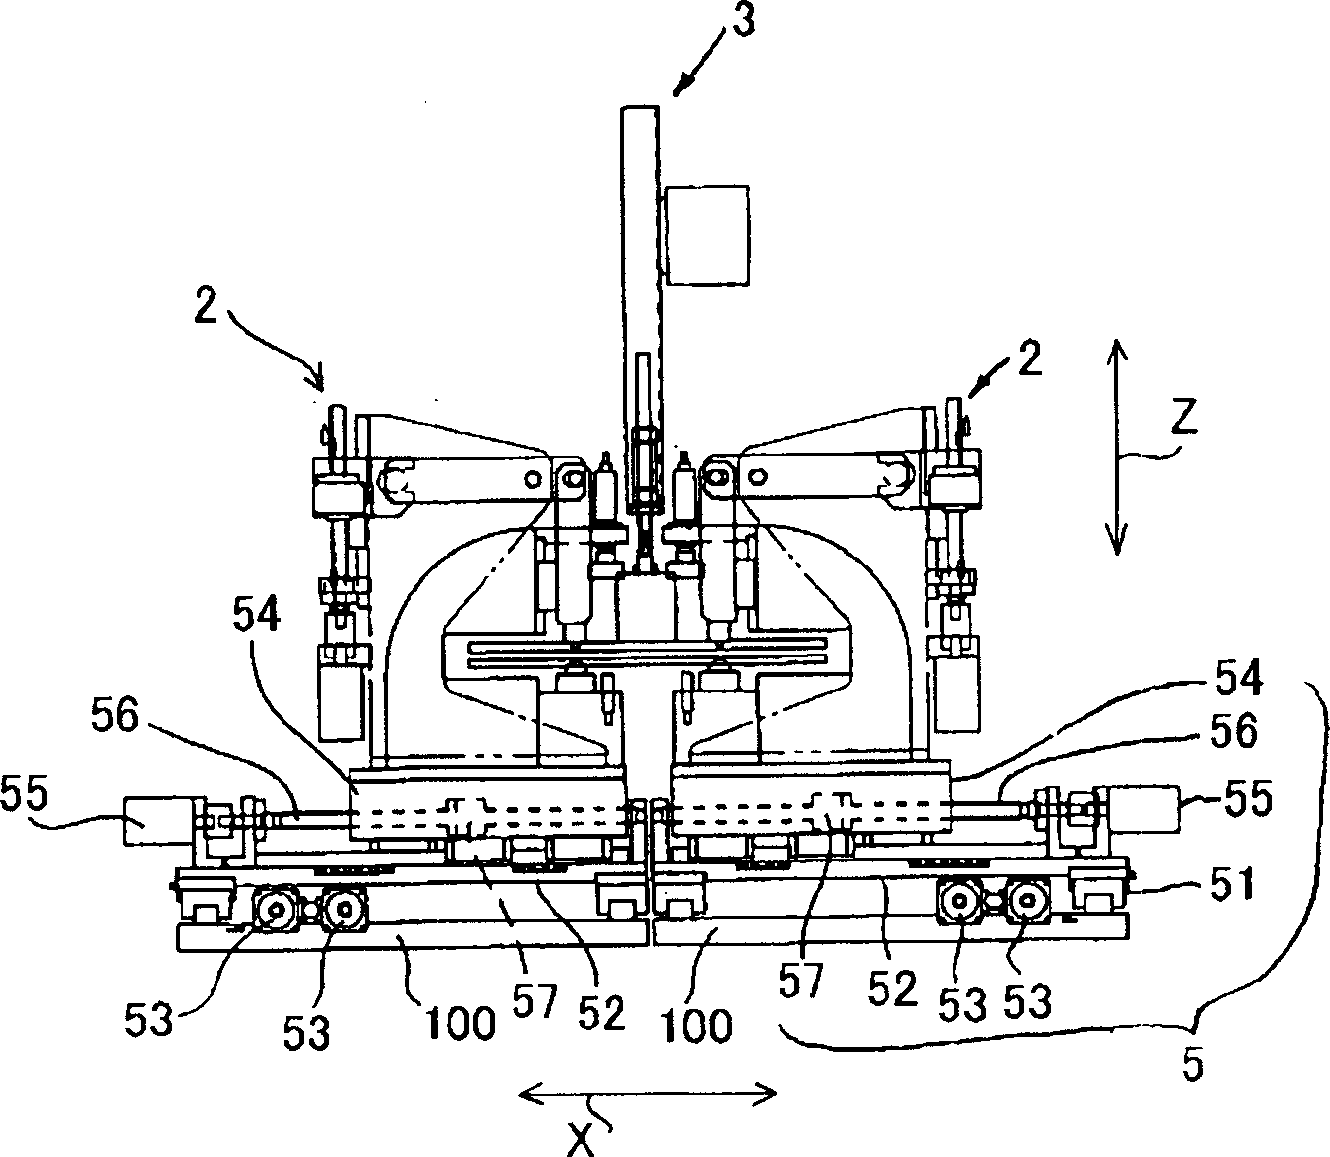 Perforating device